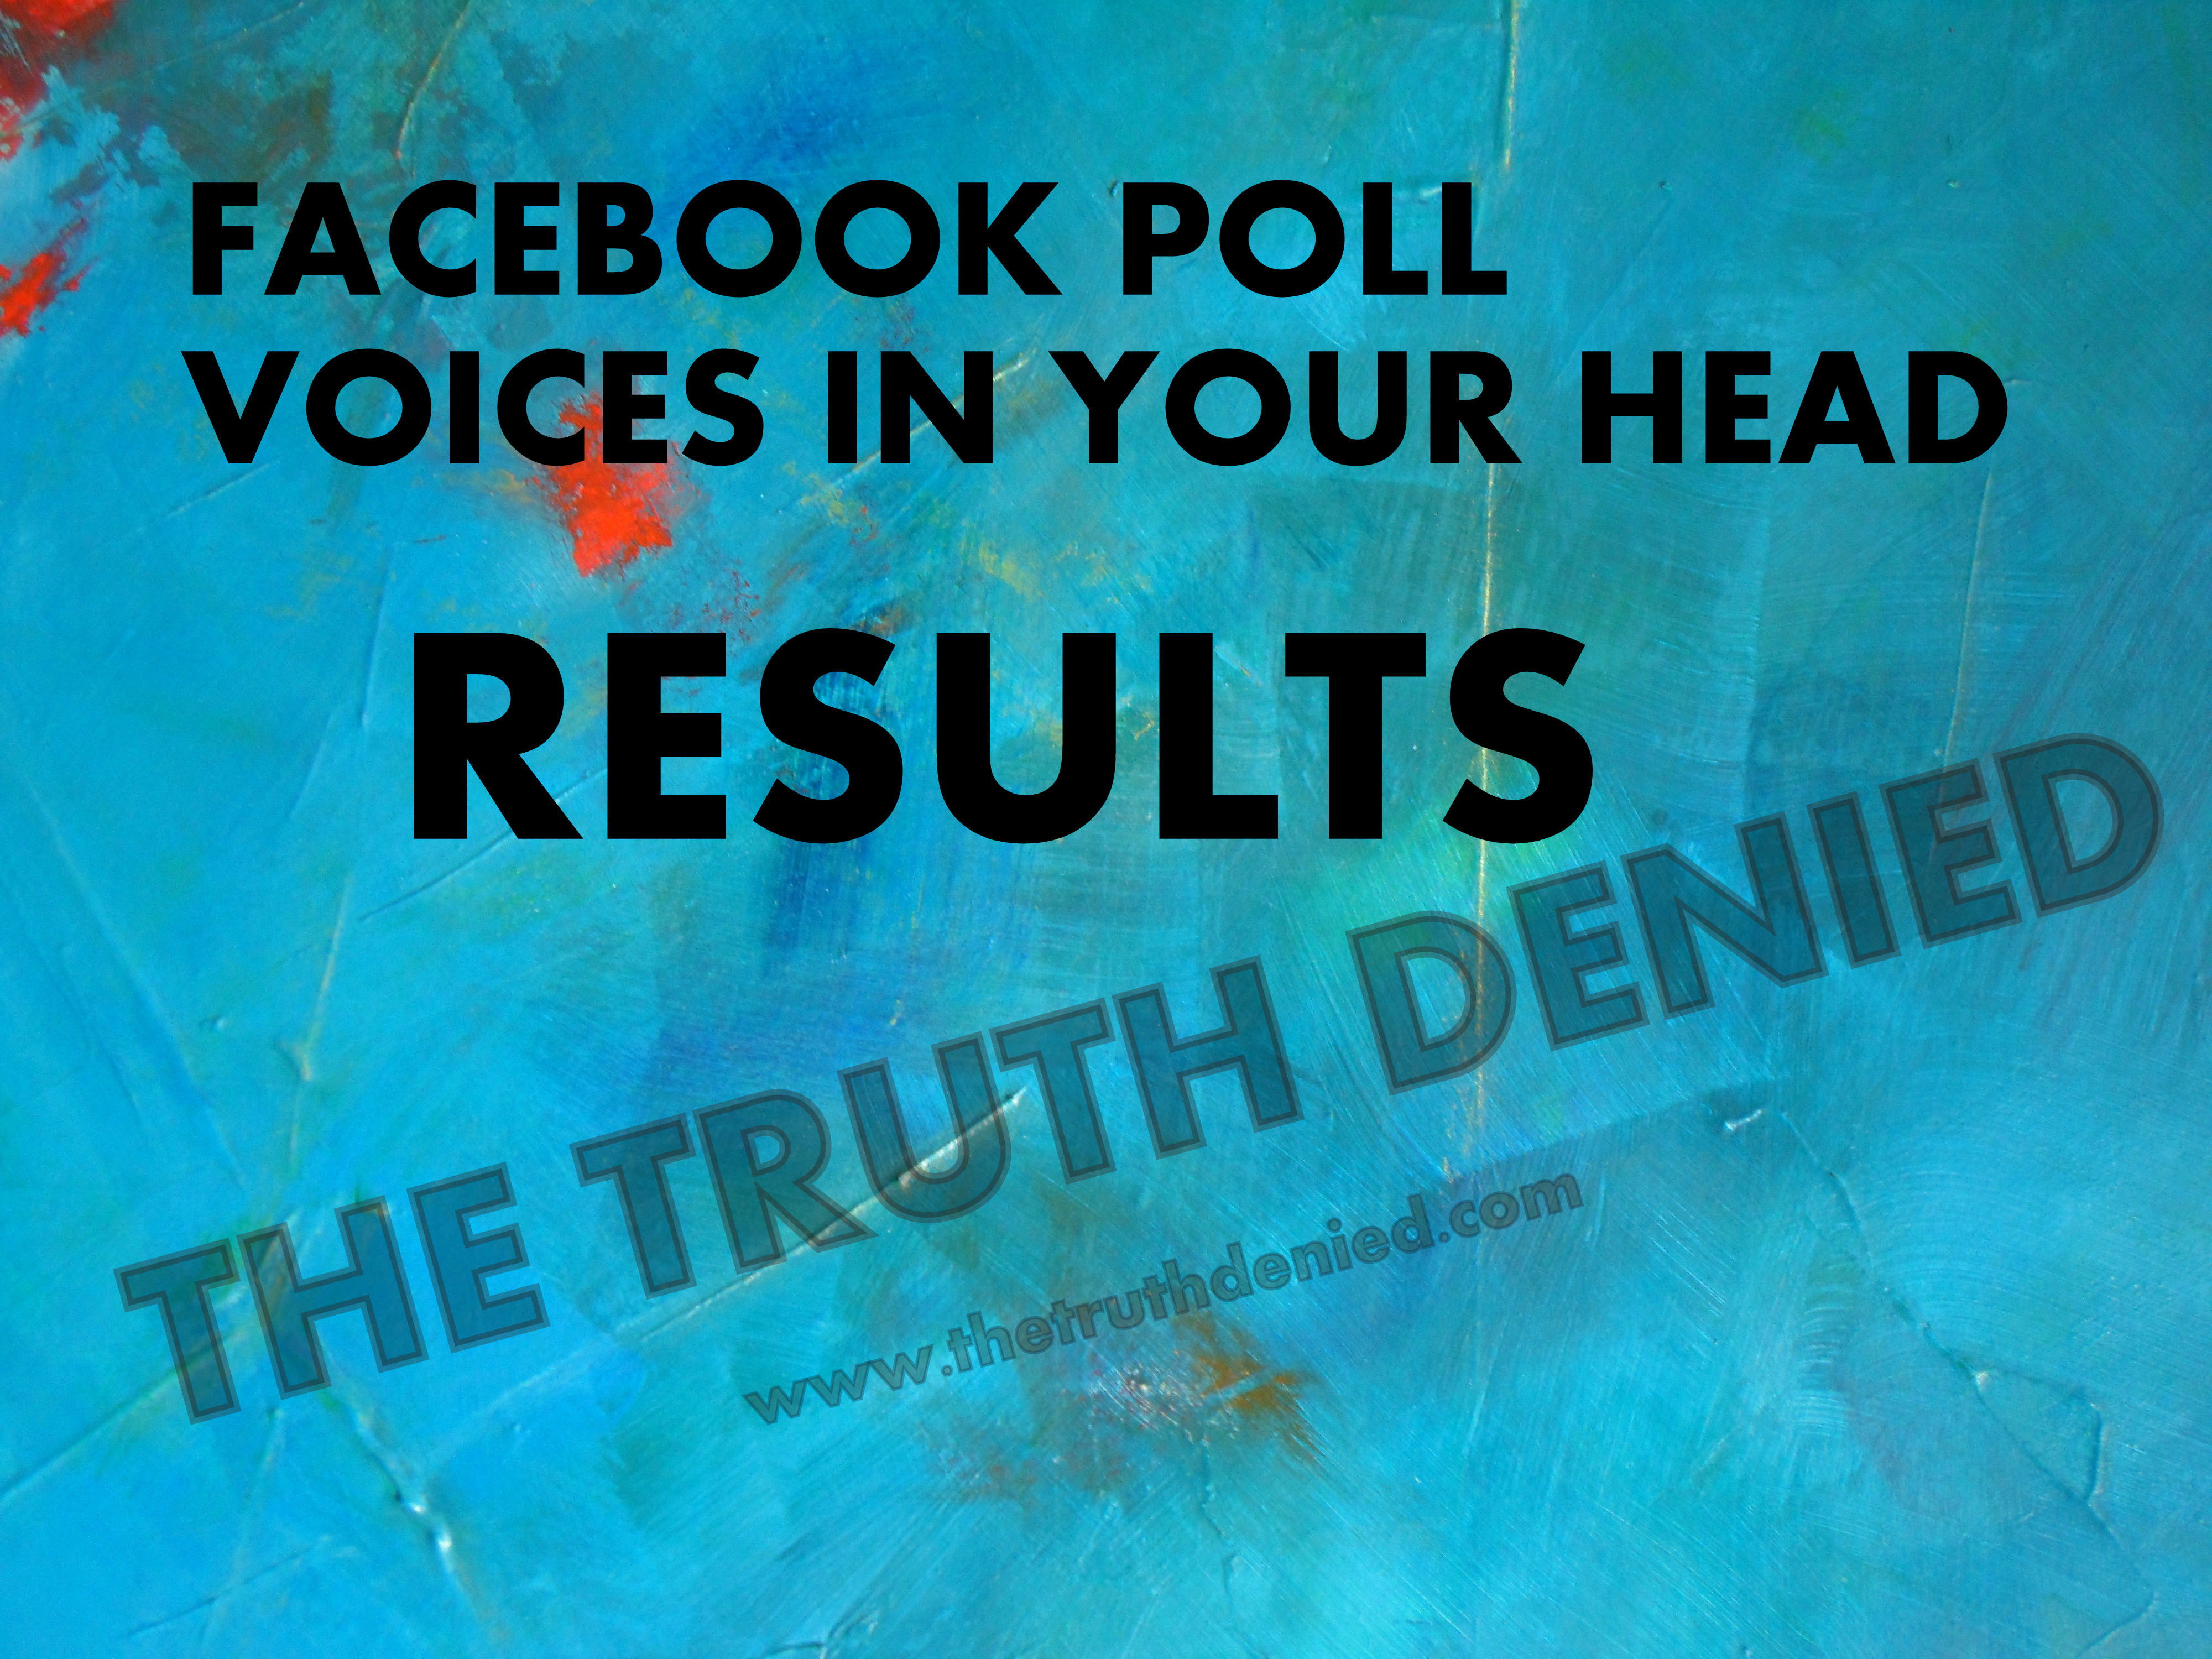 Facebook Poll: Are you crazy with the voices in your head?